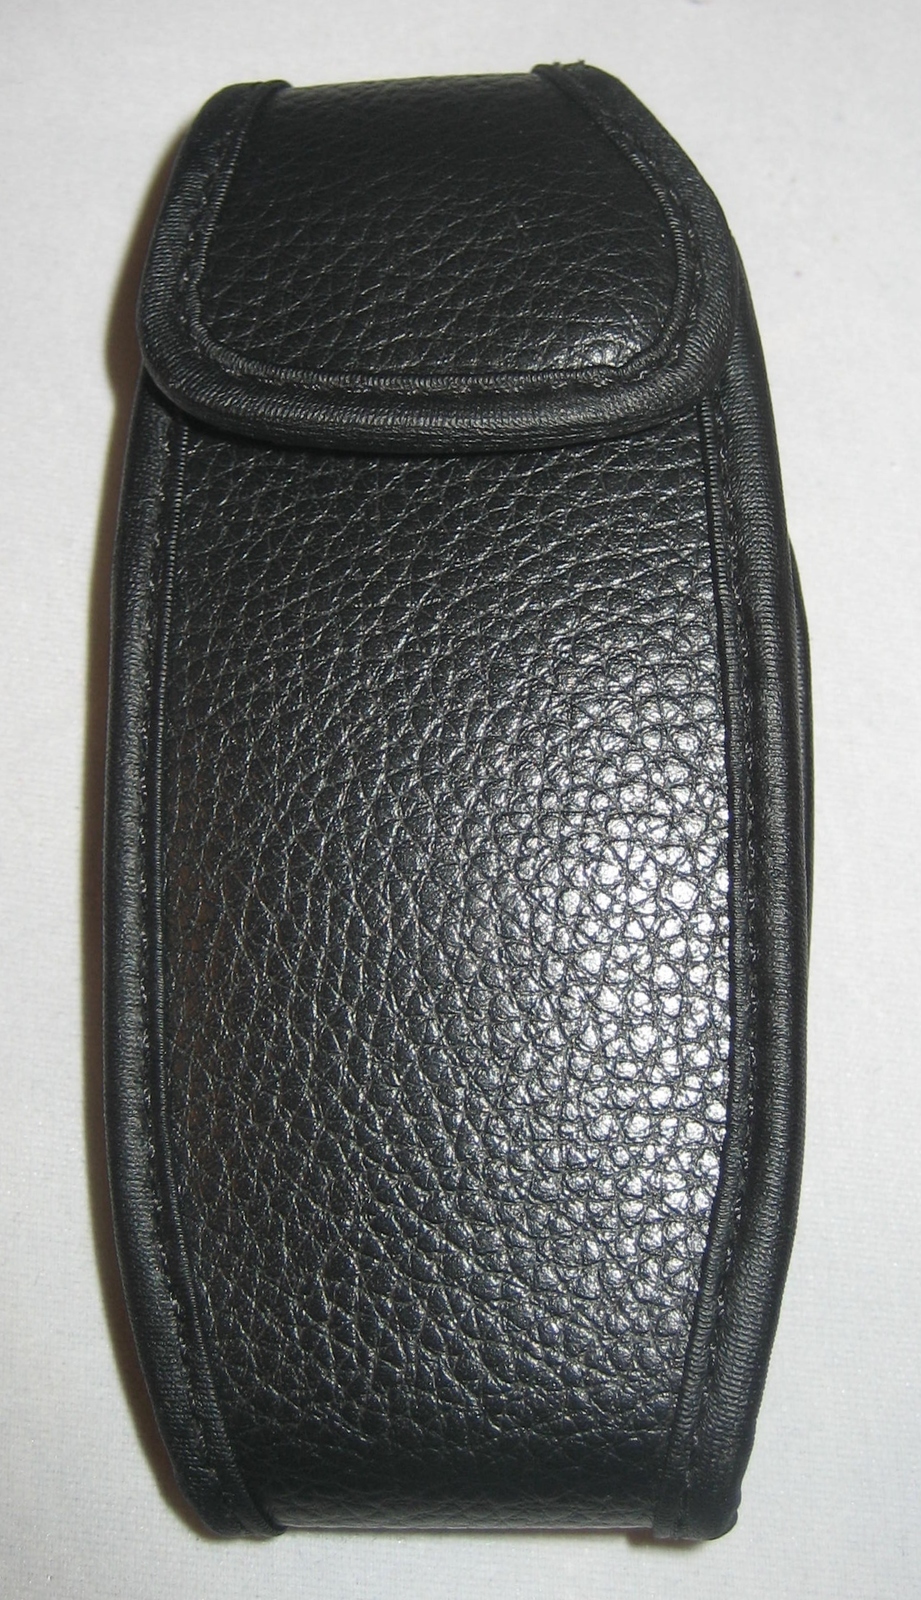 Black Leather Phone Case for Samsung R225M, Gravity - $4.99